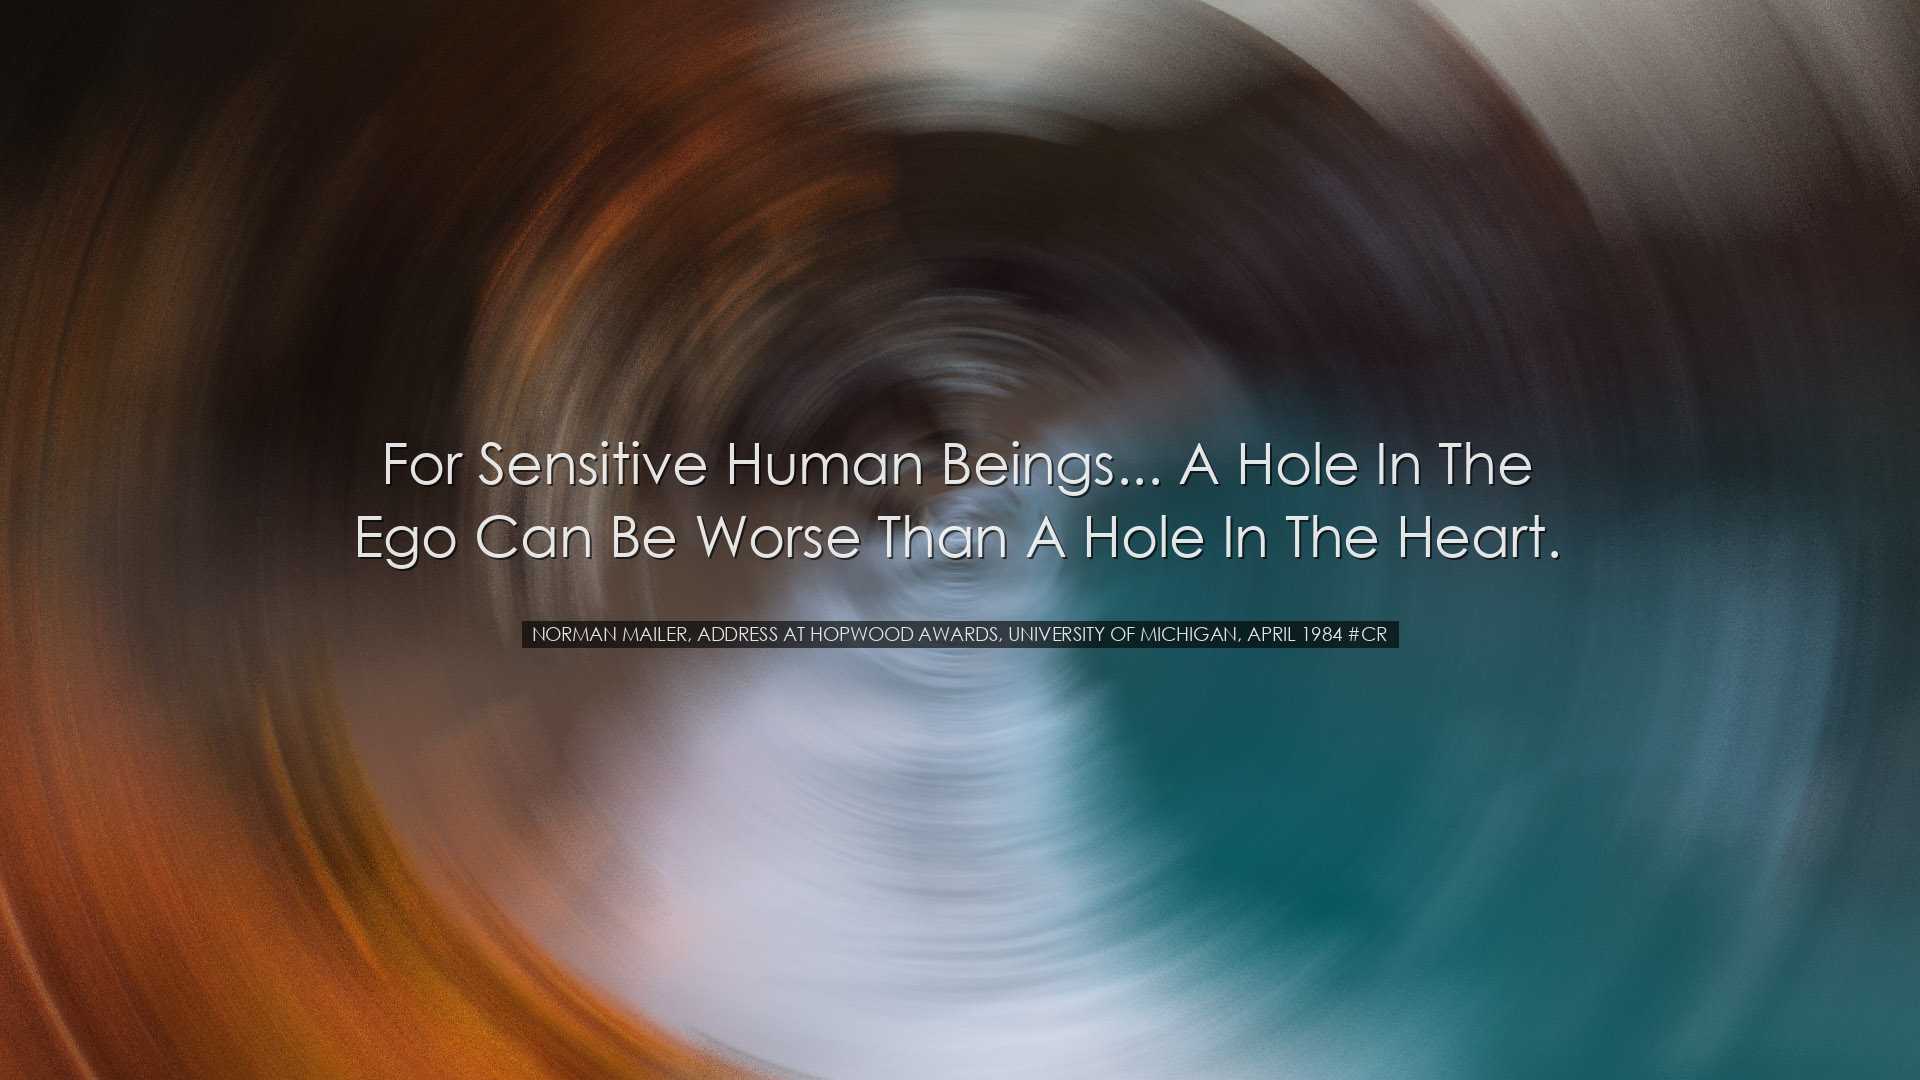 For sensitive human beings... a hole in the ego can be worse than